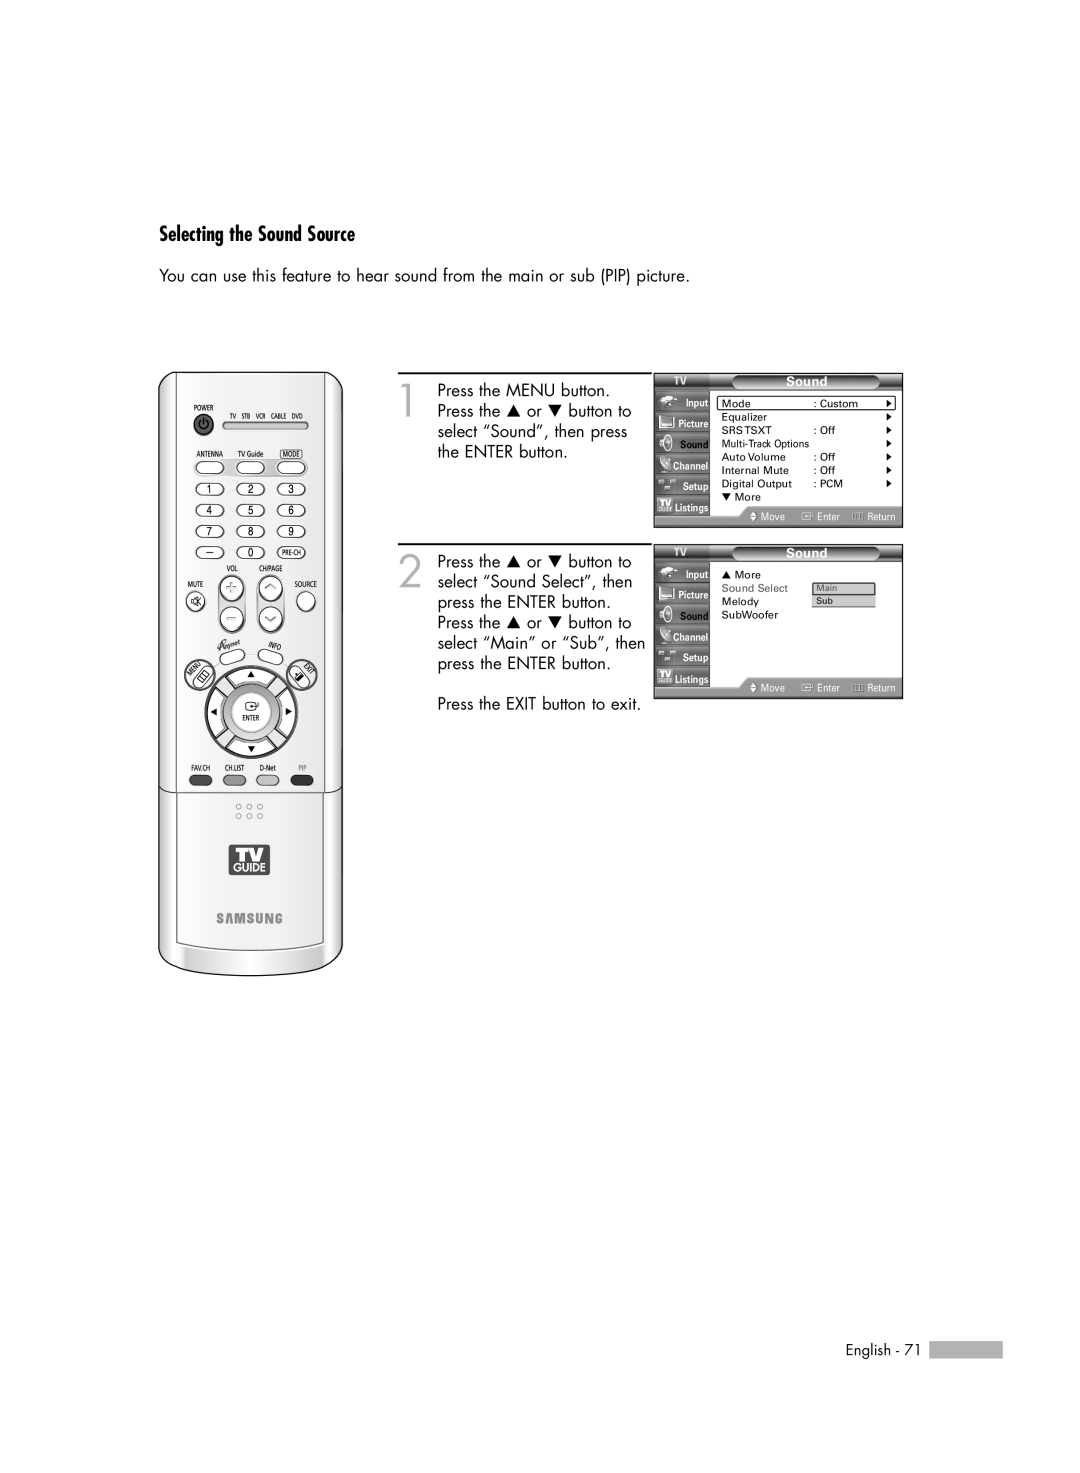 Samsung HL-R5688W manual Selecting the Sound Source, Sound Select 